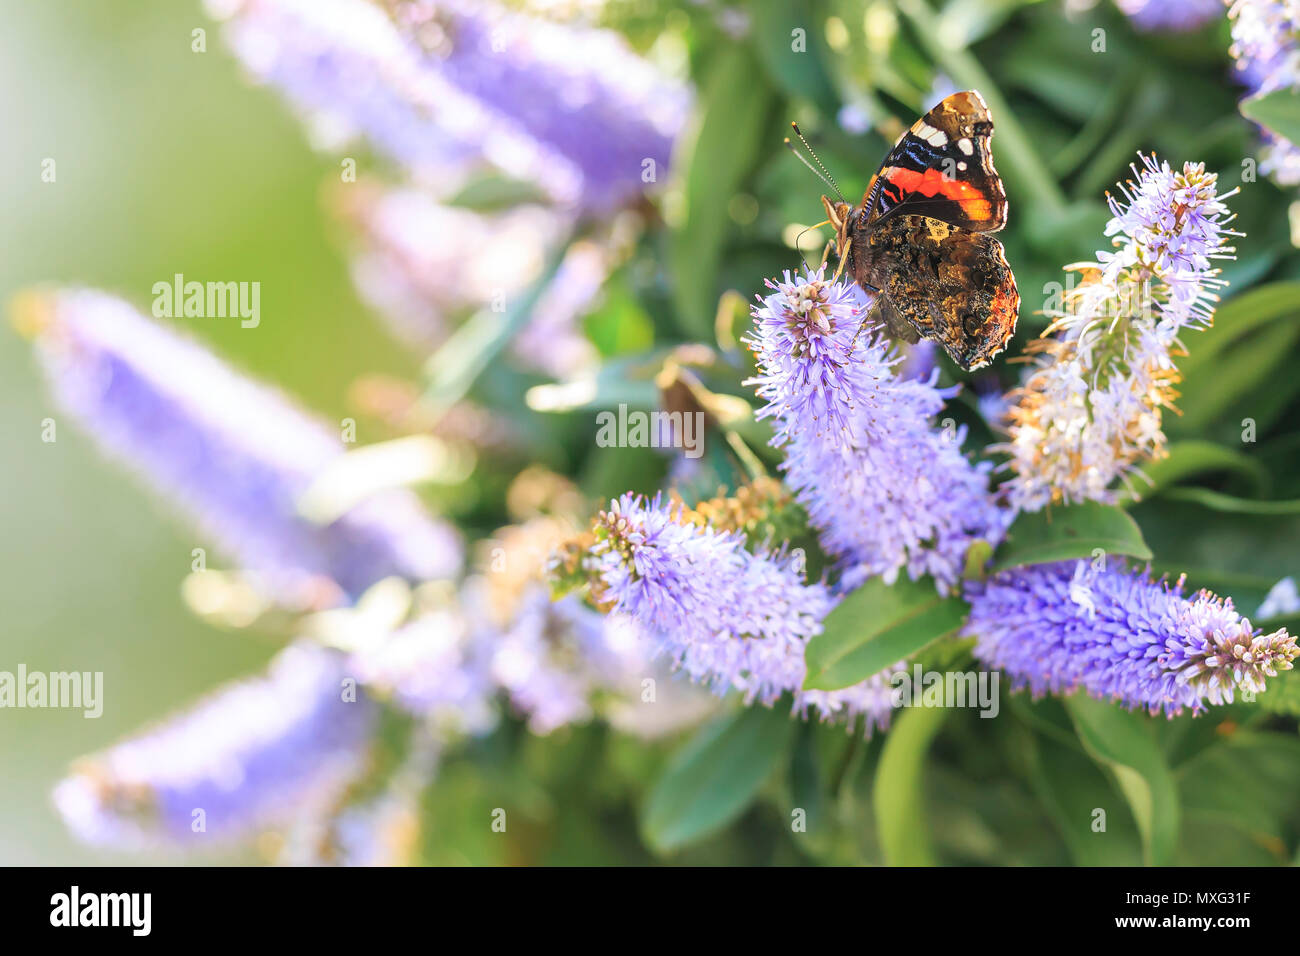 Red Admiral butterfly, Vanessa atalanta, feeding nectar on a purple flower in a bush. Stock Photo